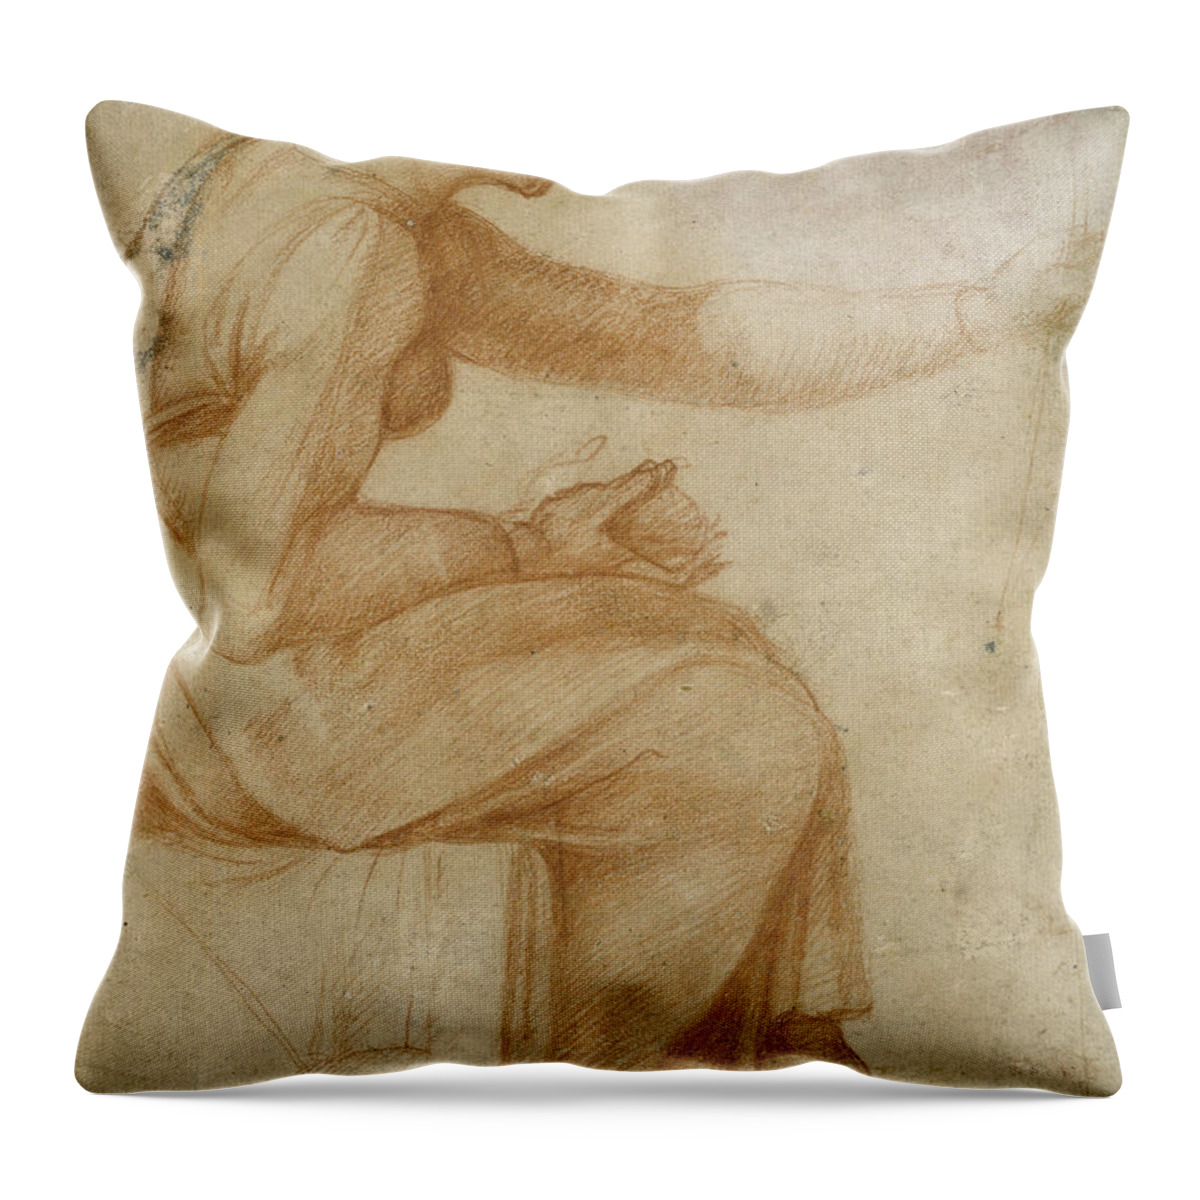 Ceiling Throw Pillow featuring the painting Detail From The Sistine Ceiling Red Chalk By Michelangelo by Michelangelo Buonarroti